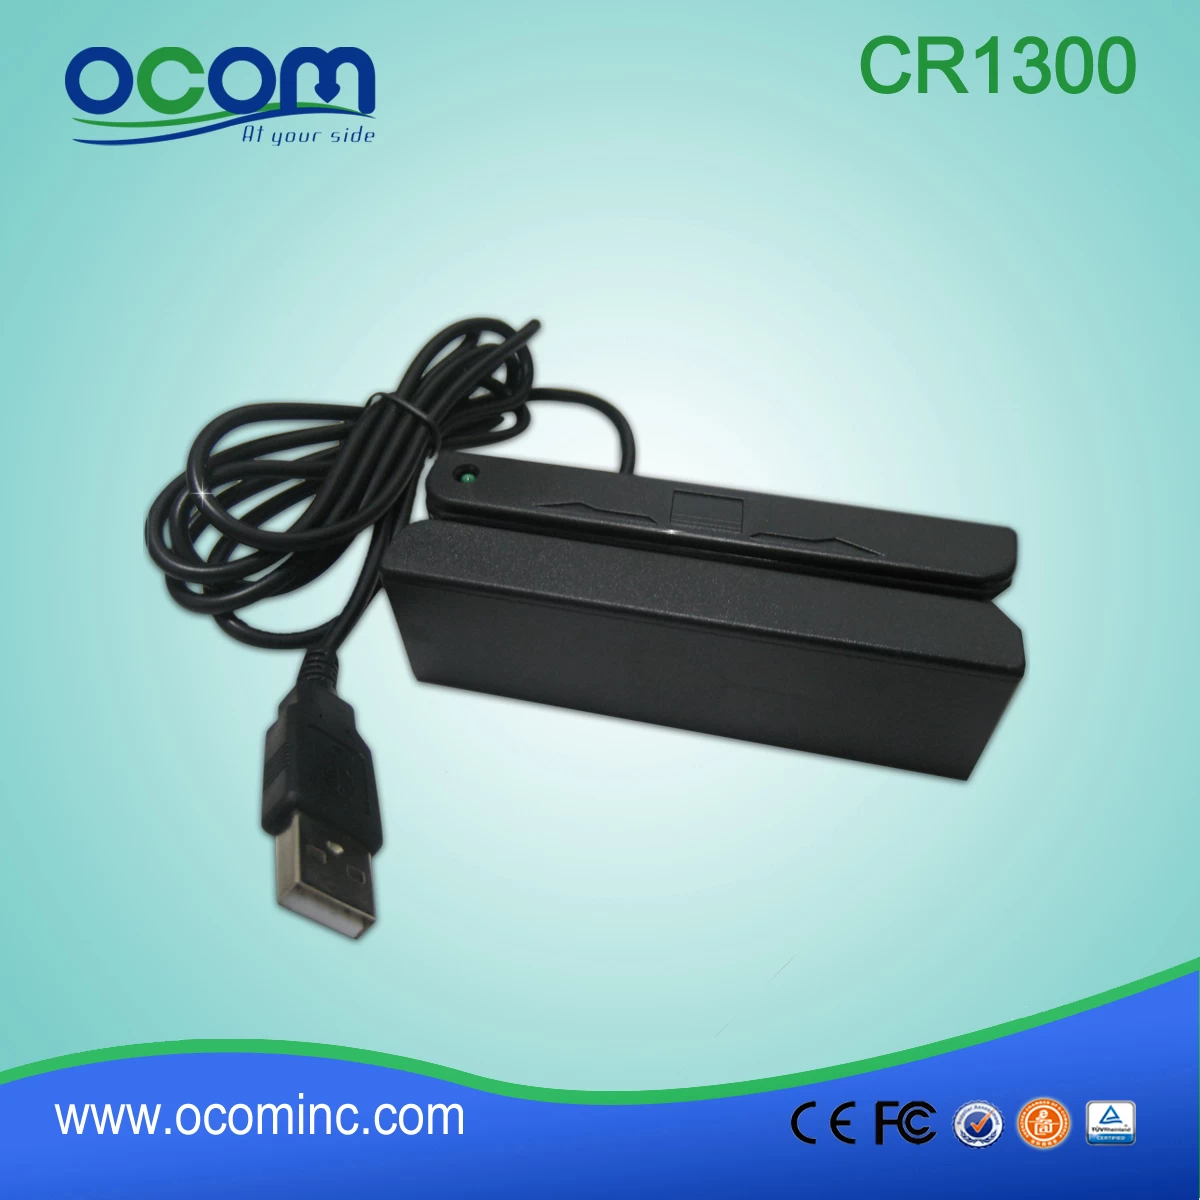 Mobile Android USB Magnetic Stripe Card Reader 3 track CR1300